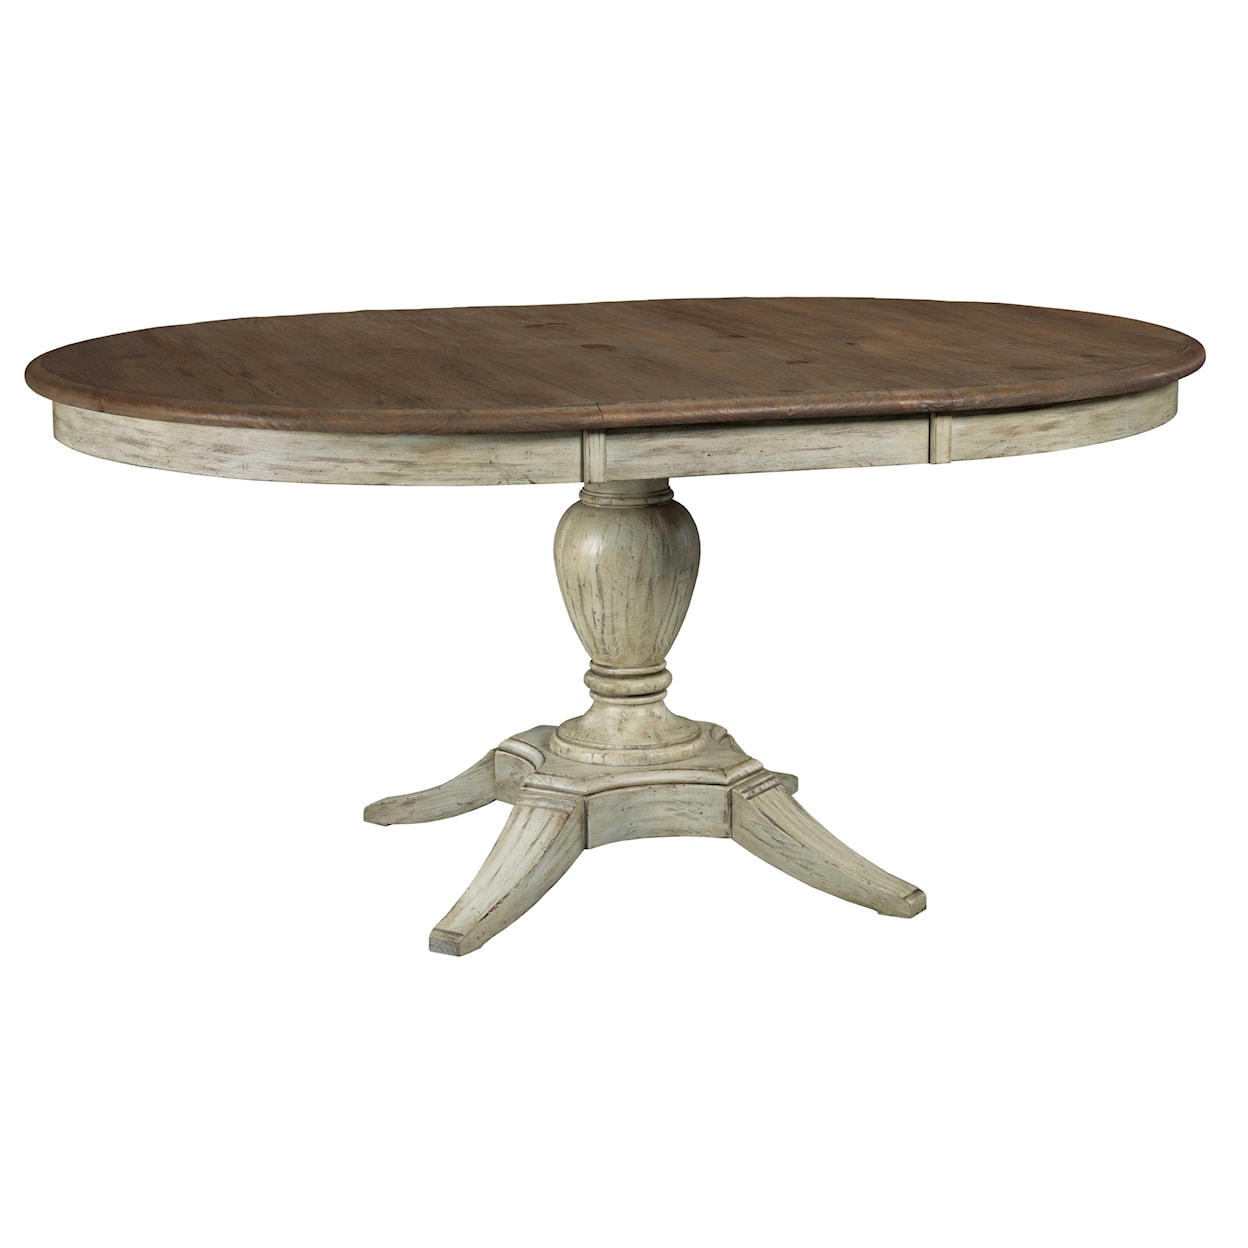 Kincaid Furniture Weatherford Round Dining Table